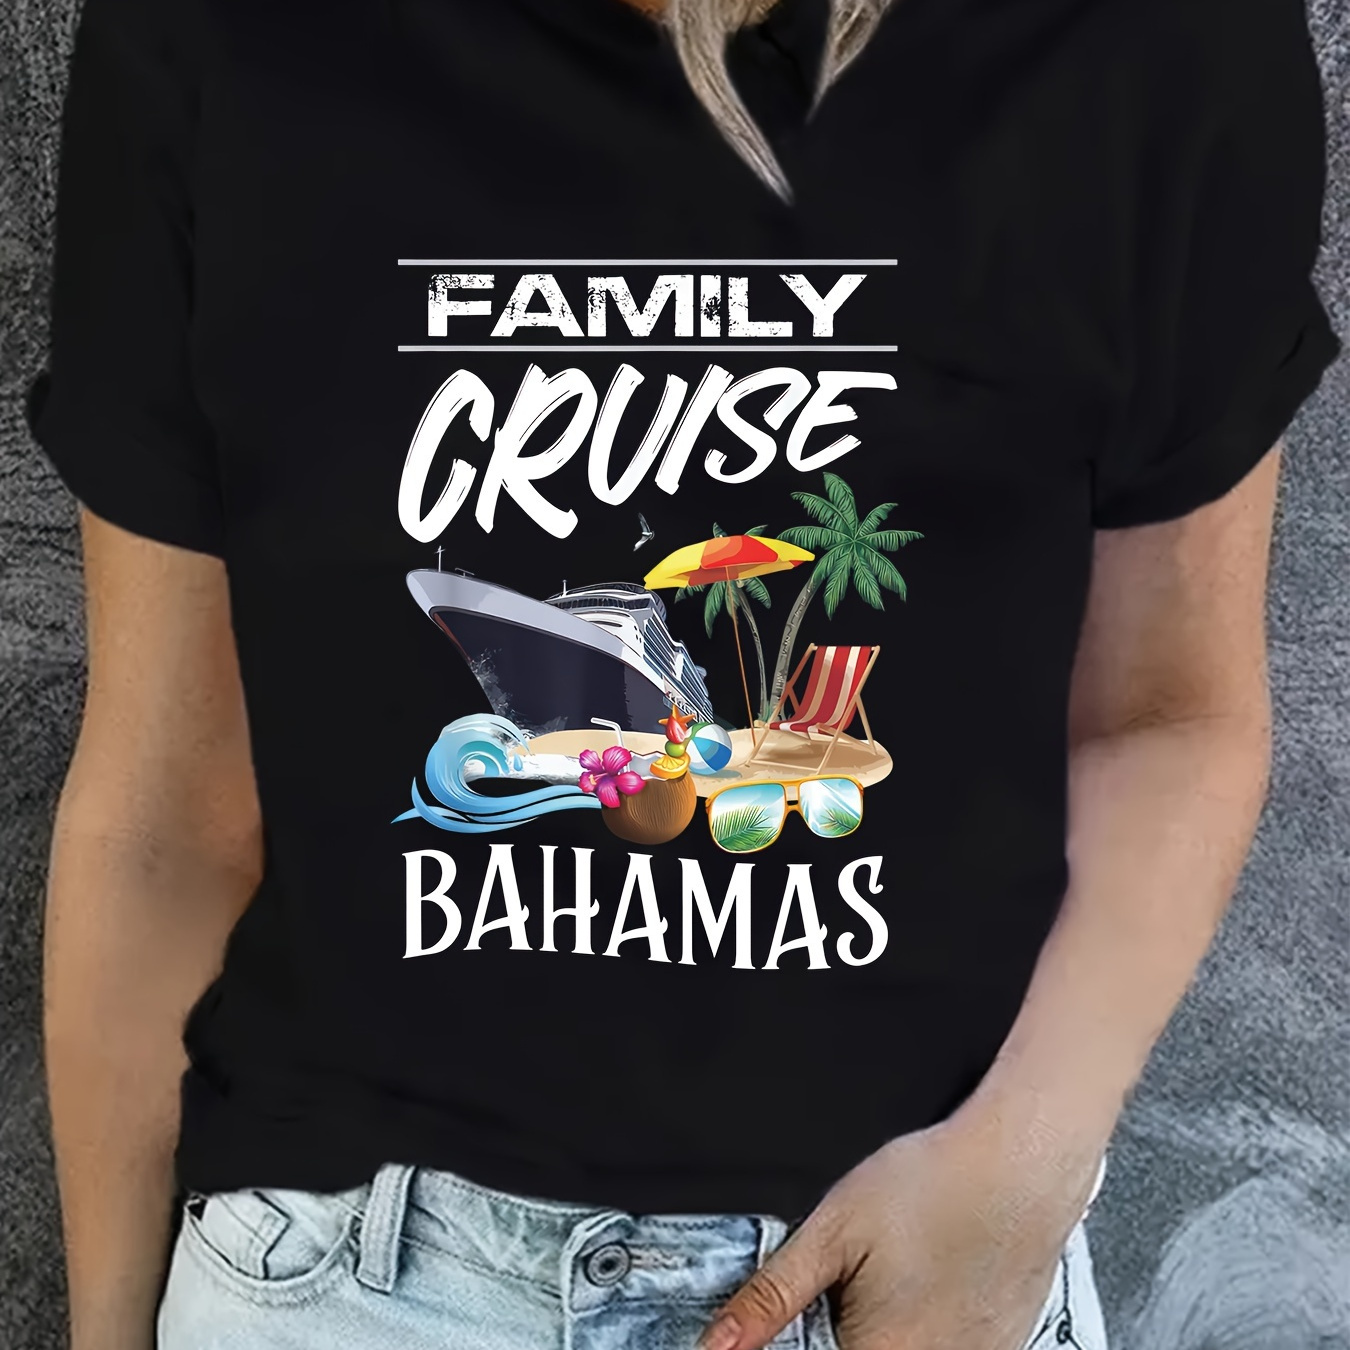 

Family Cruise Print T-shirt, Casual Crew Neck Short Sleeve Top For Spring & Summer, Women's Clothing